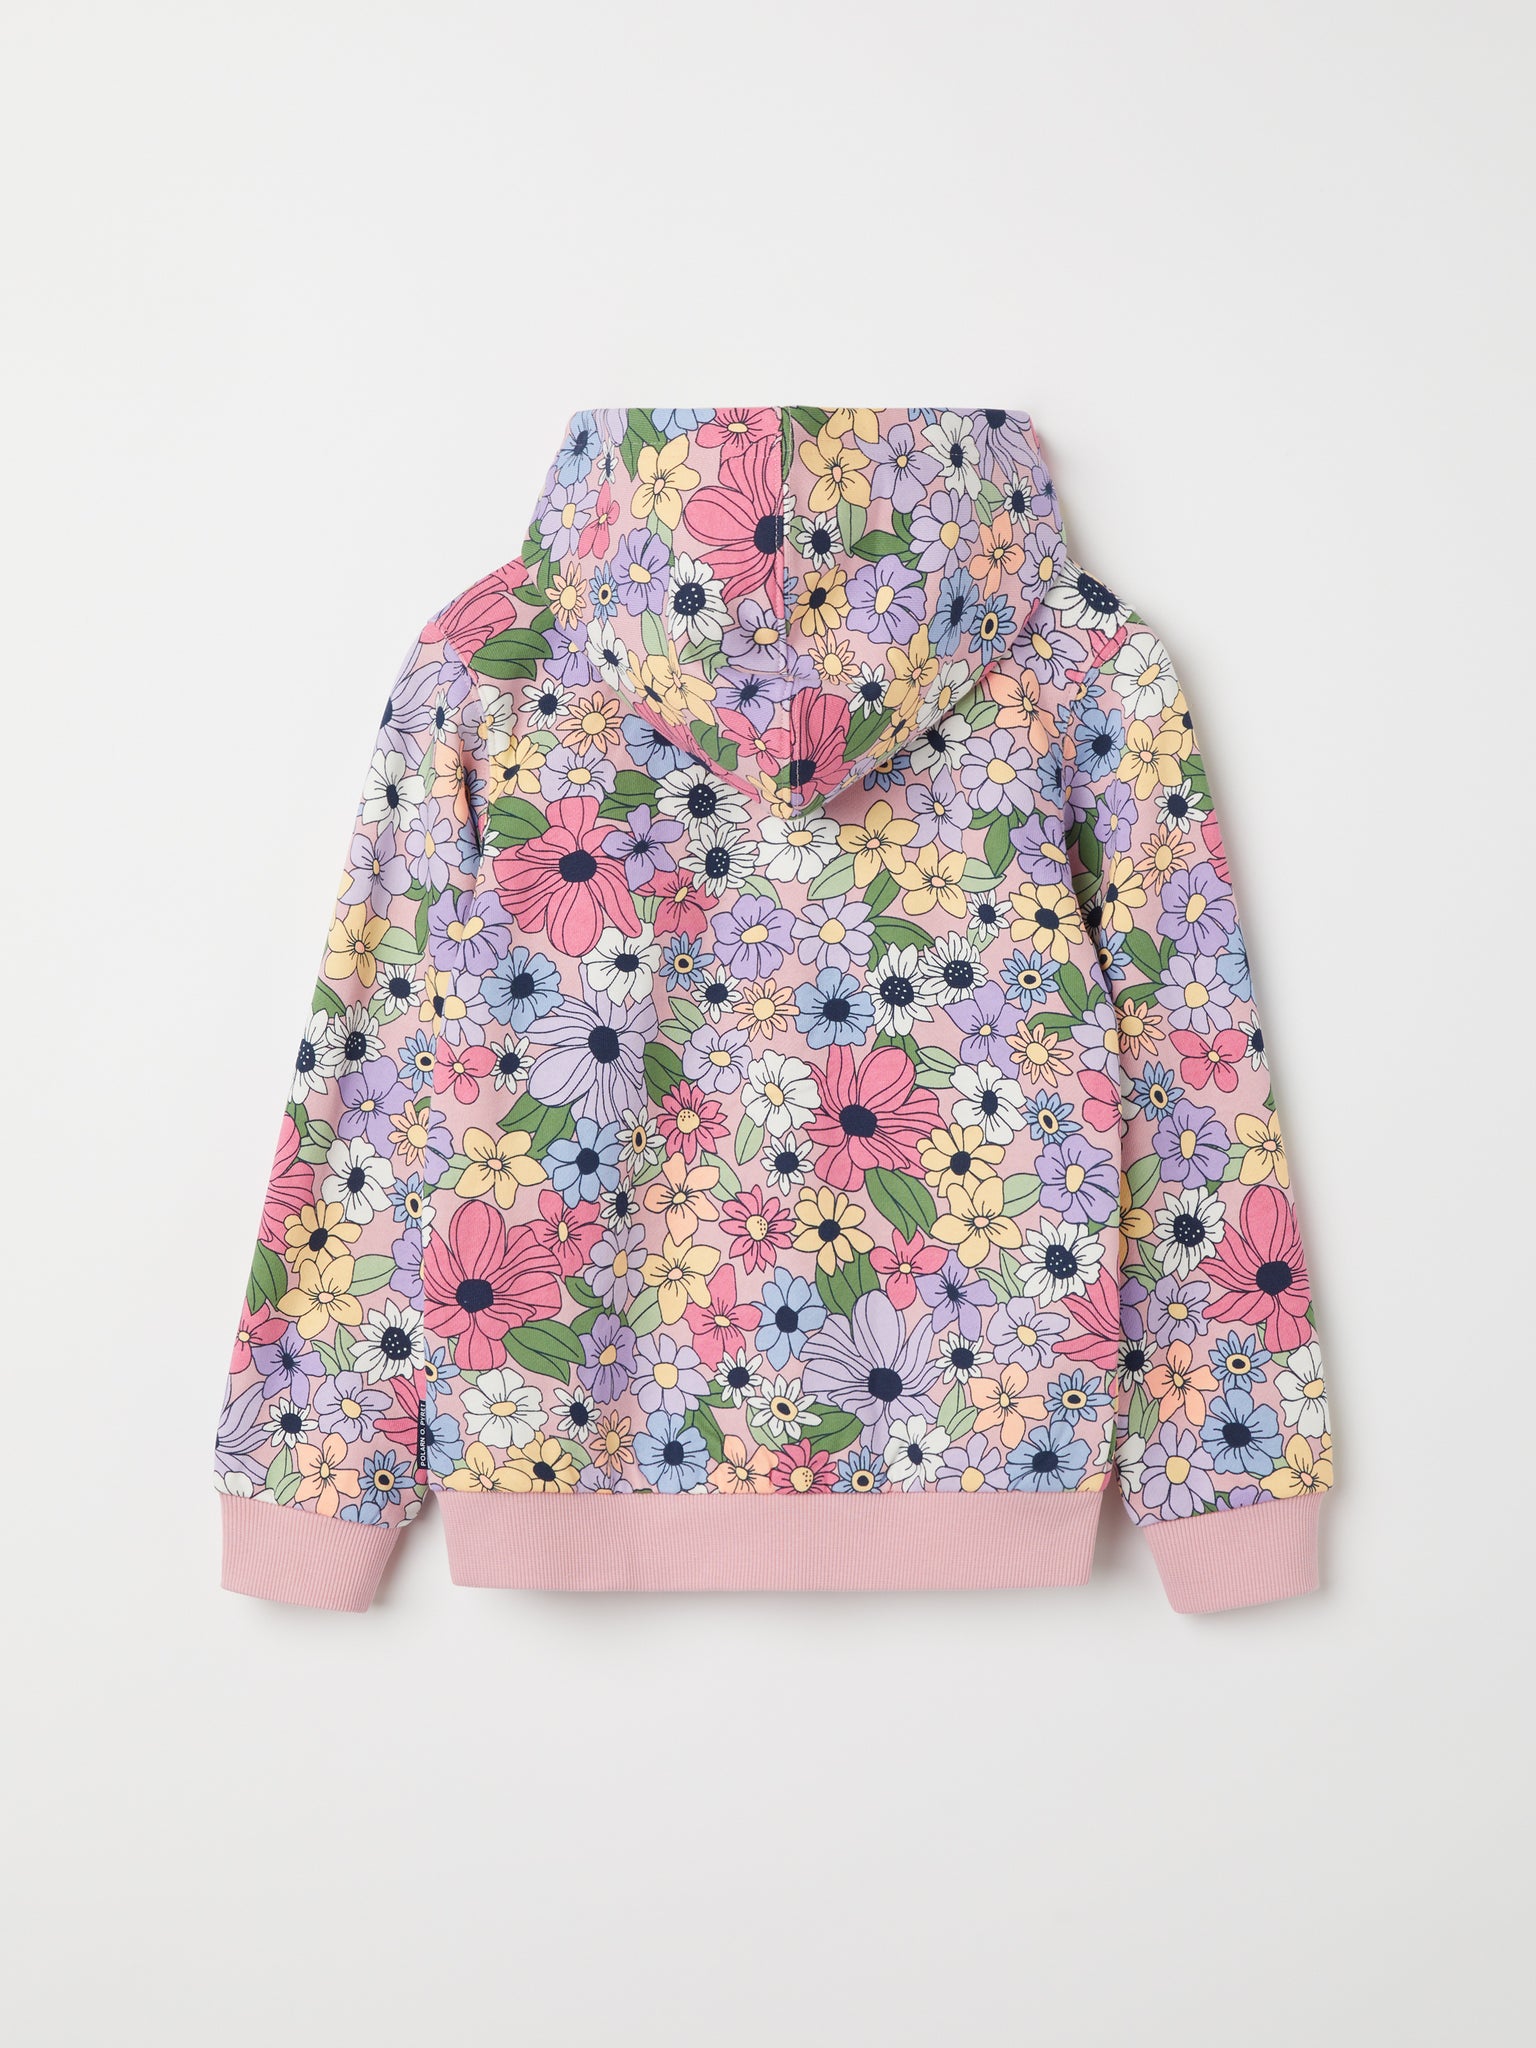 Floral Print Kids Hoodie from the Polarn O. Pyret kidswear collection. Clothes made using sustainably sourced materials.